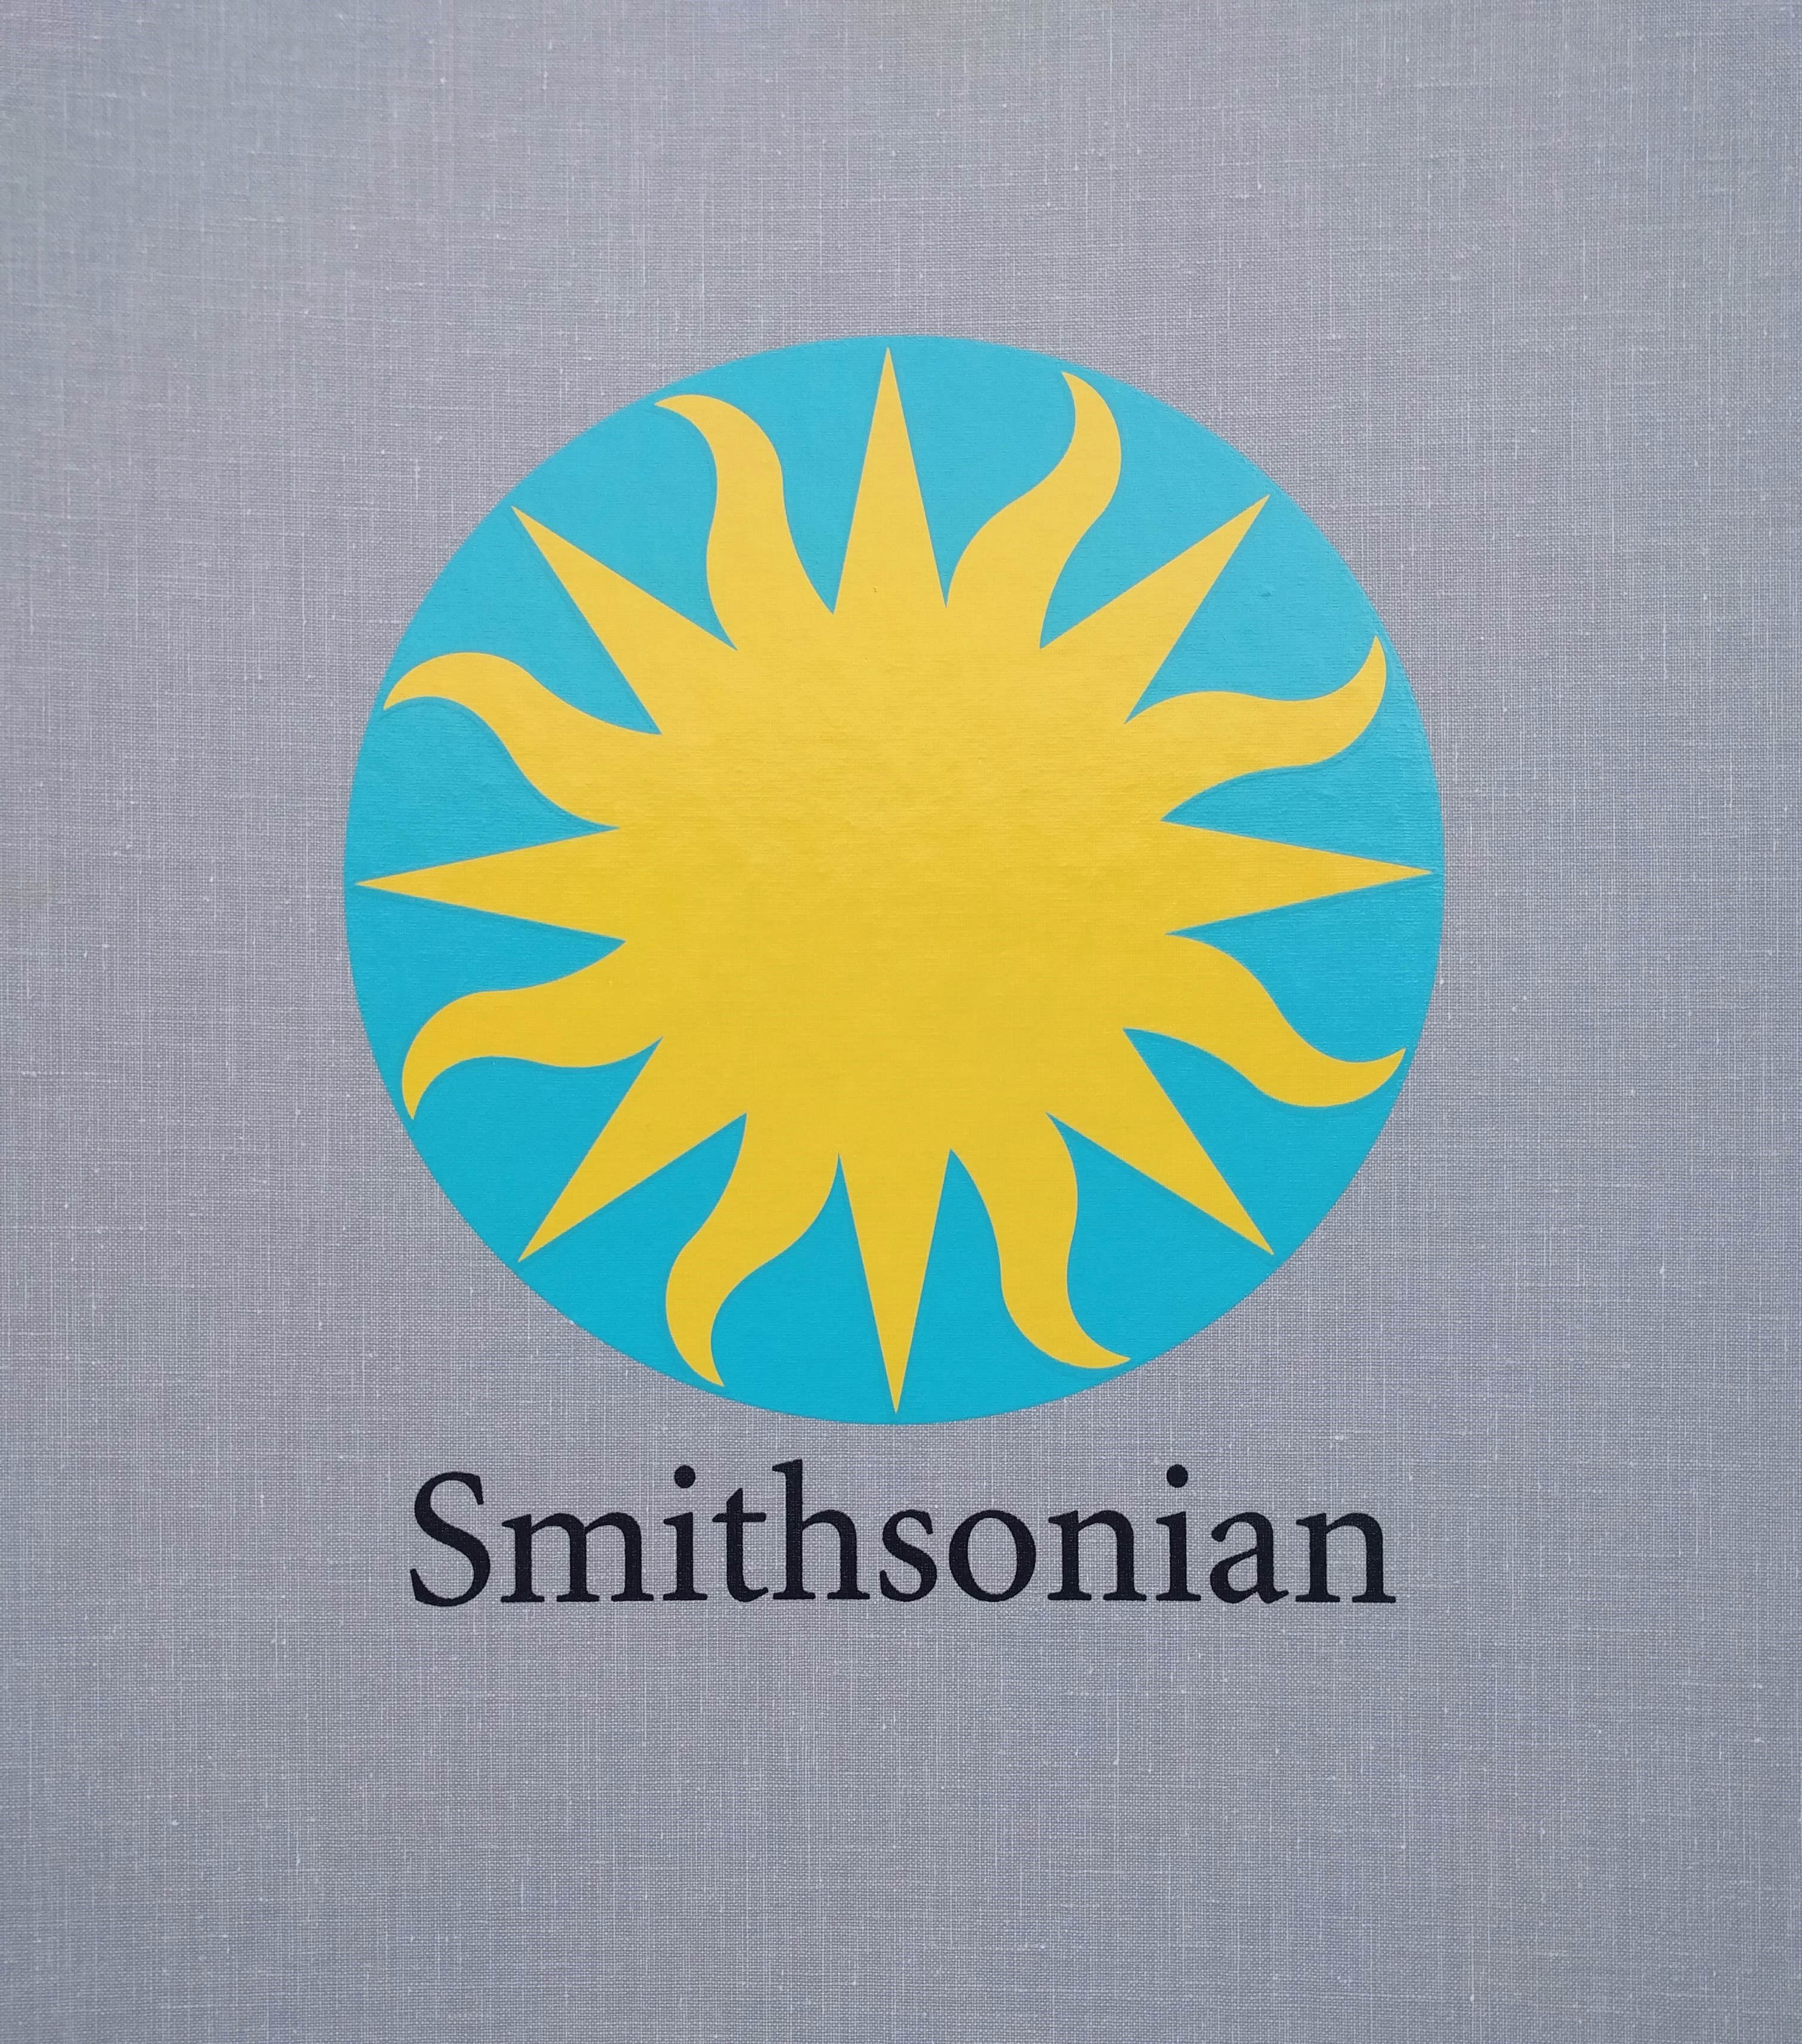 Teal circle with gold sunburst in center with Smithsonian text below